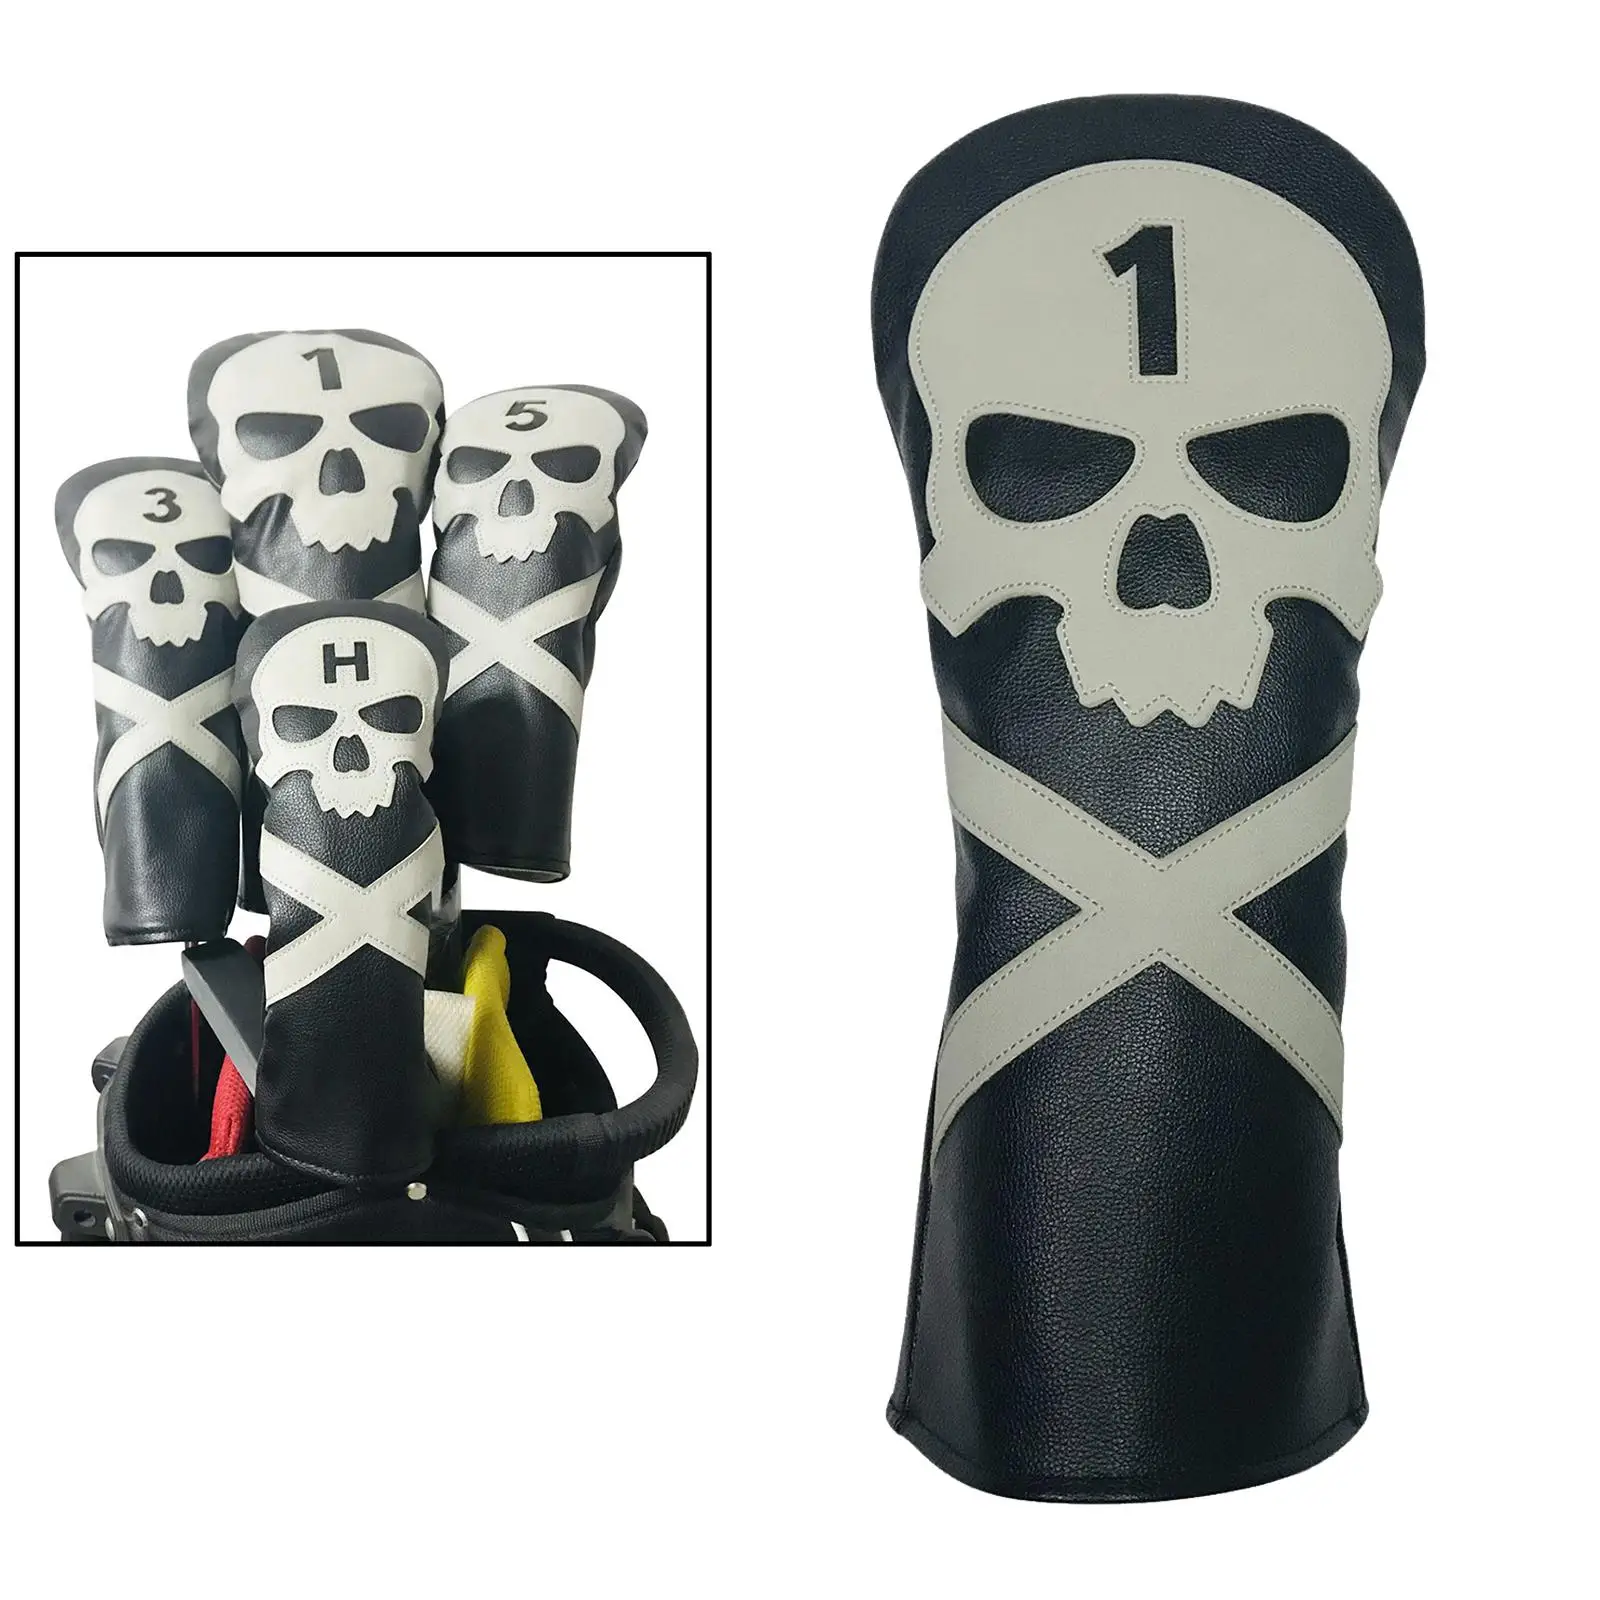 Waterproof PU Leather Golf Headcover  3 5 UT Wood Fairways Driver Hybrid Head  with No. Tag, Golf Accessories